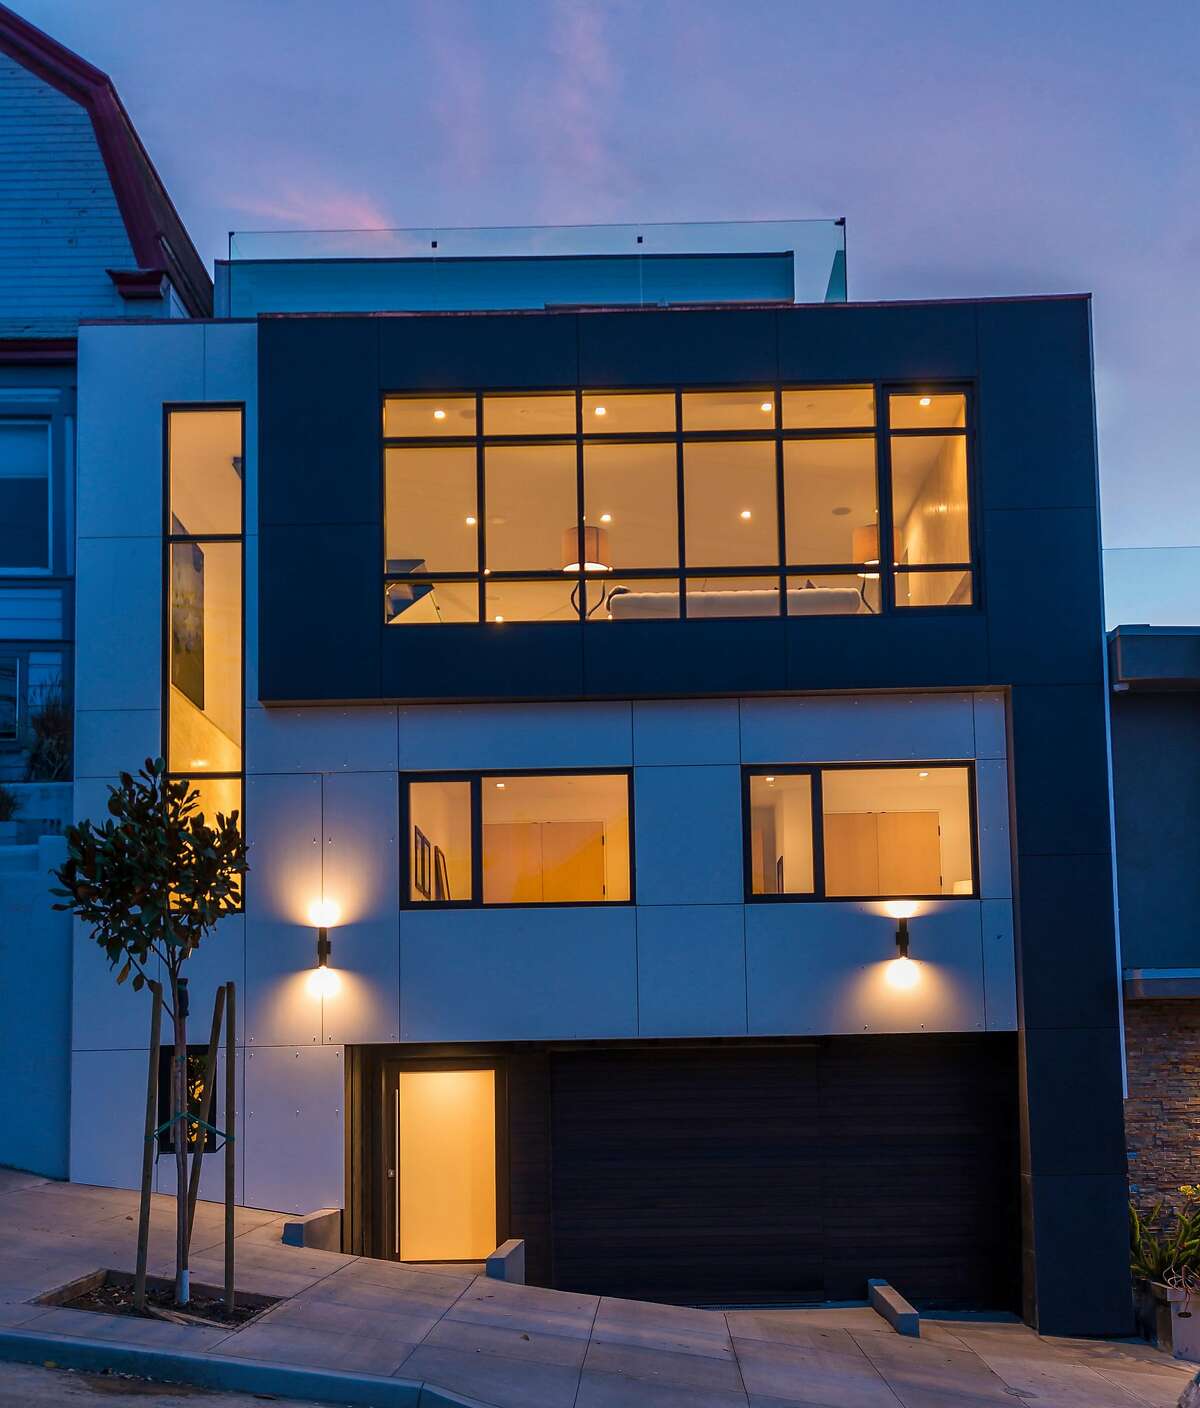 1188 Diamond St. is a five-bedroom in Noe Valley available for $4.75 million.